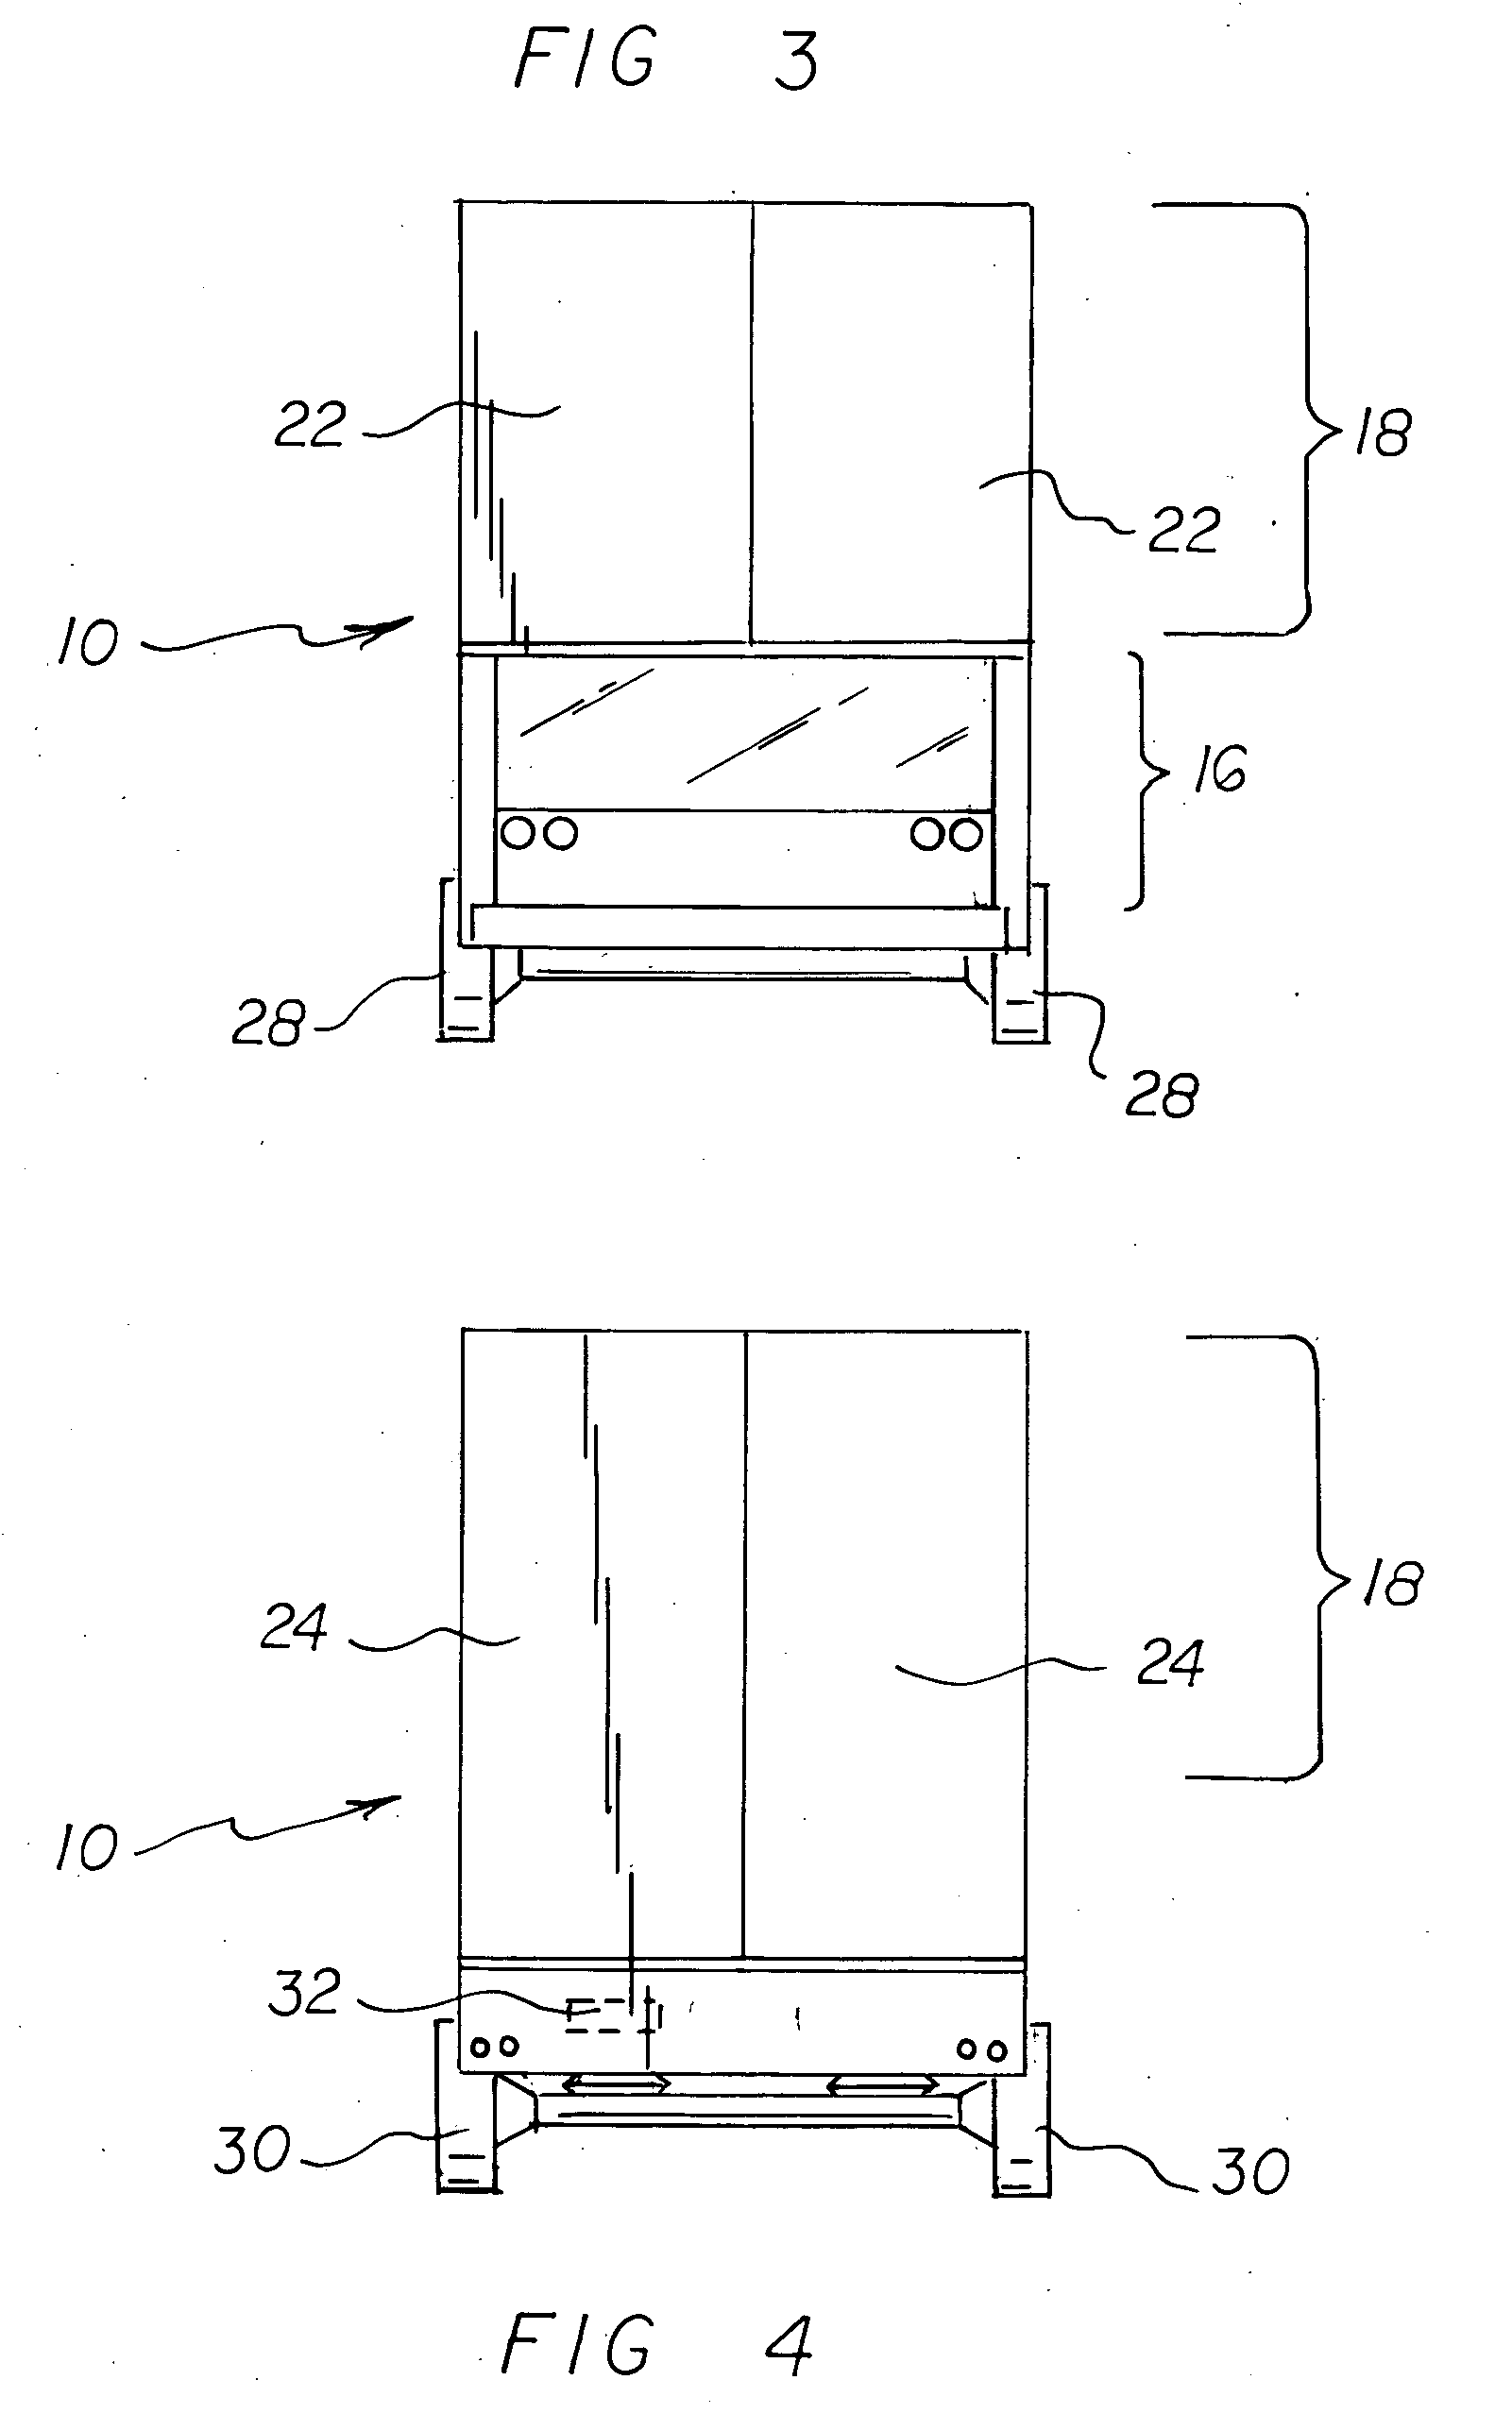 Reduced wind resistant haulage vehicle apparatus